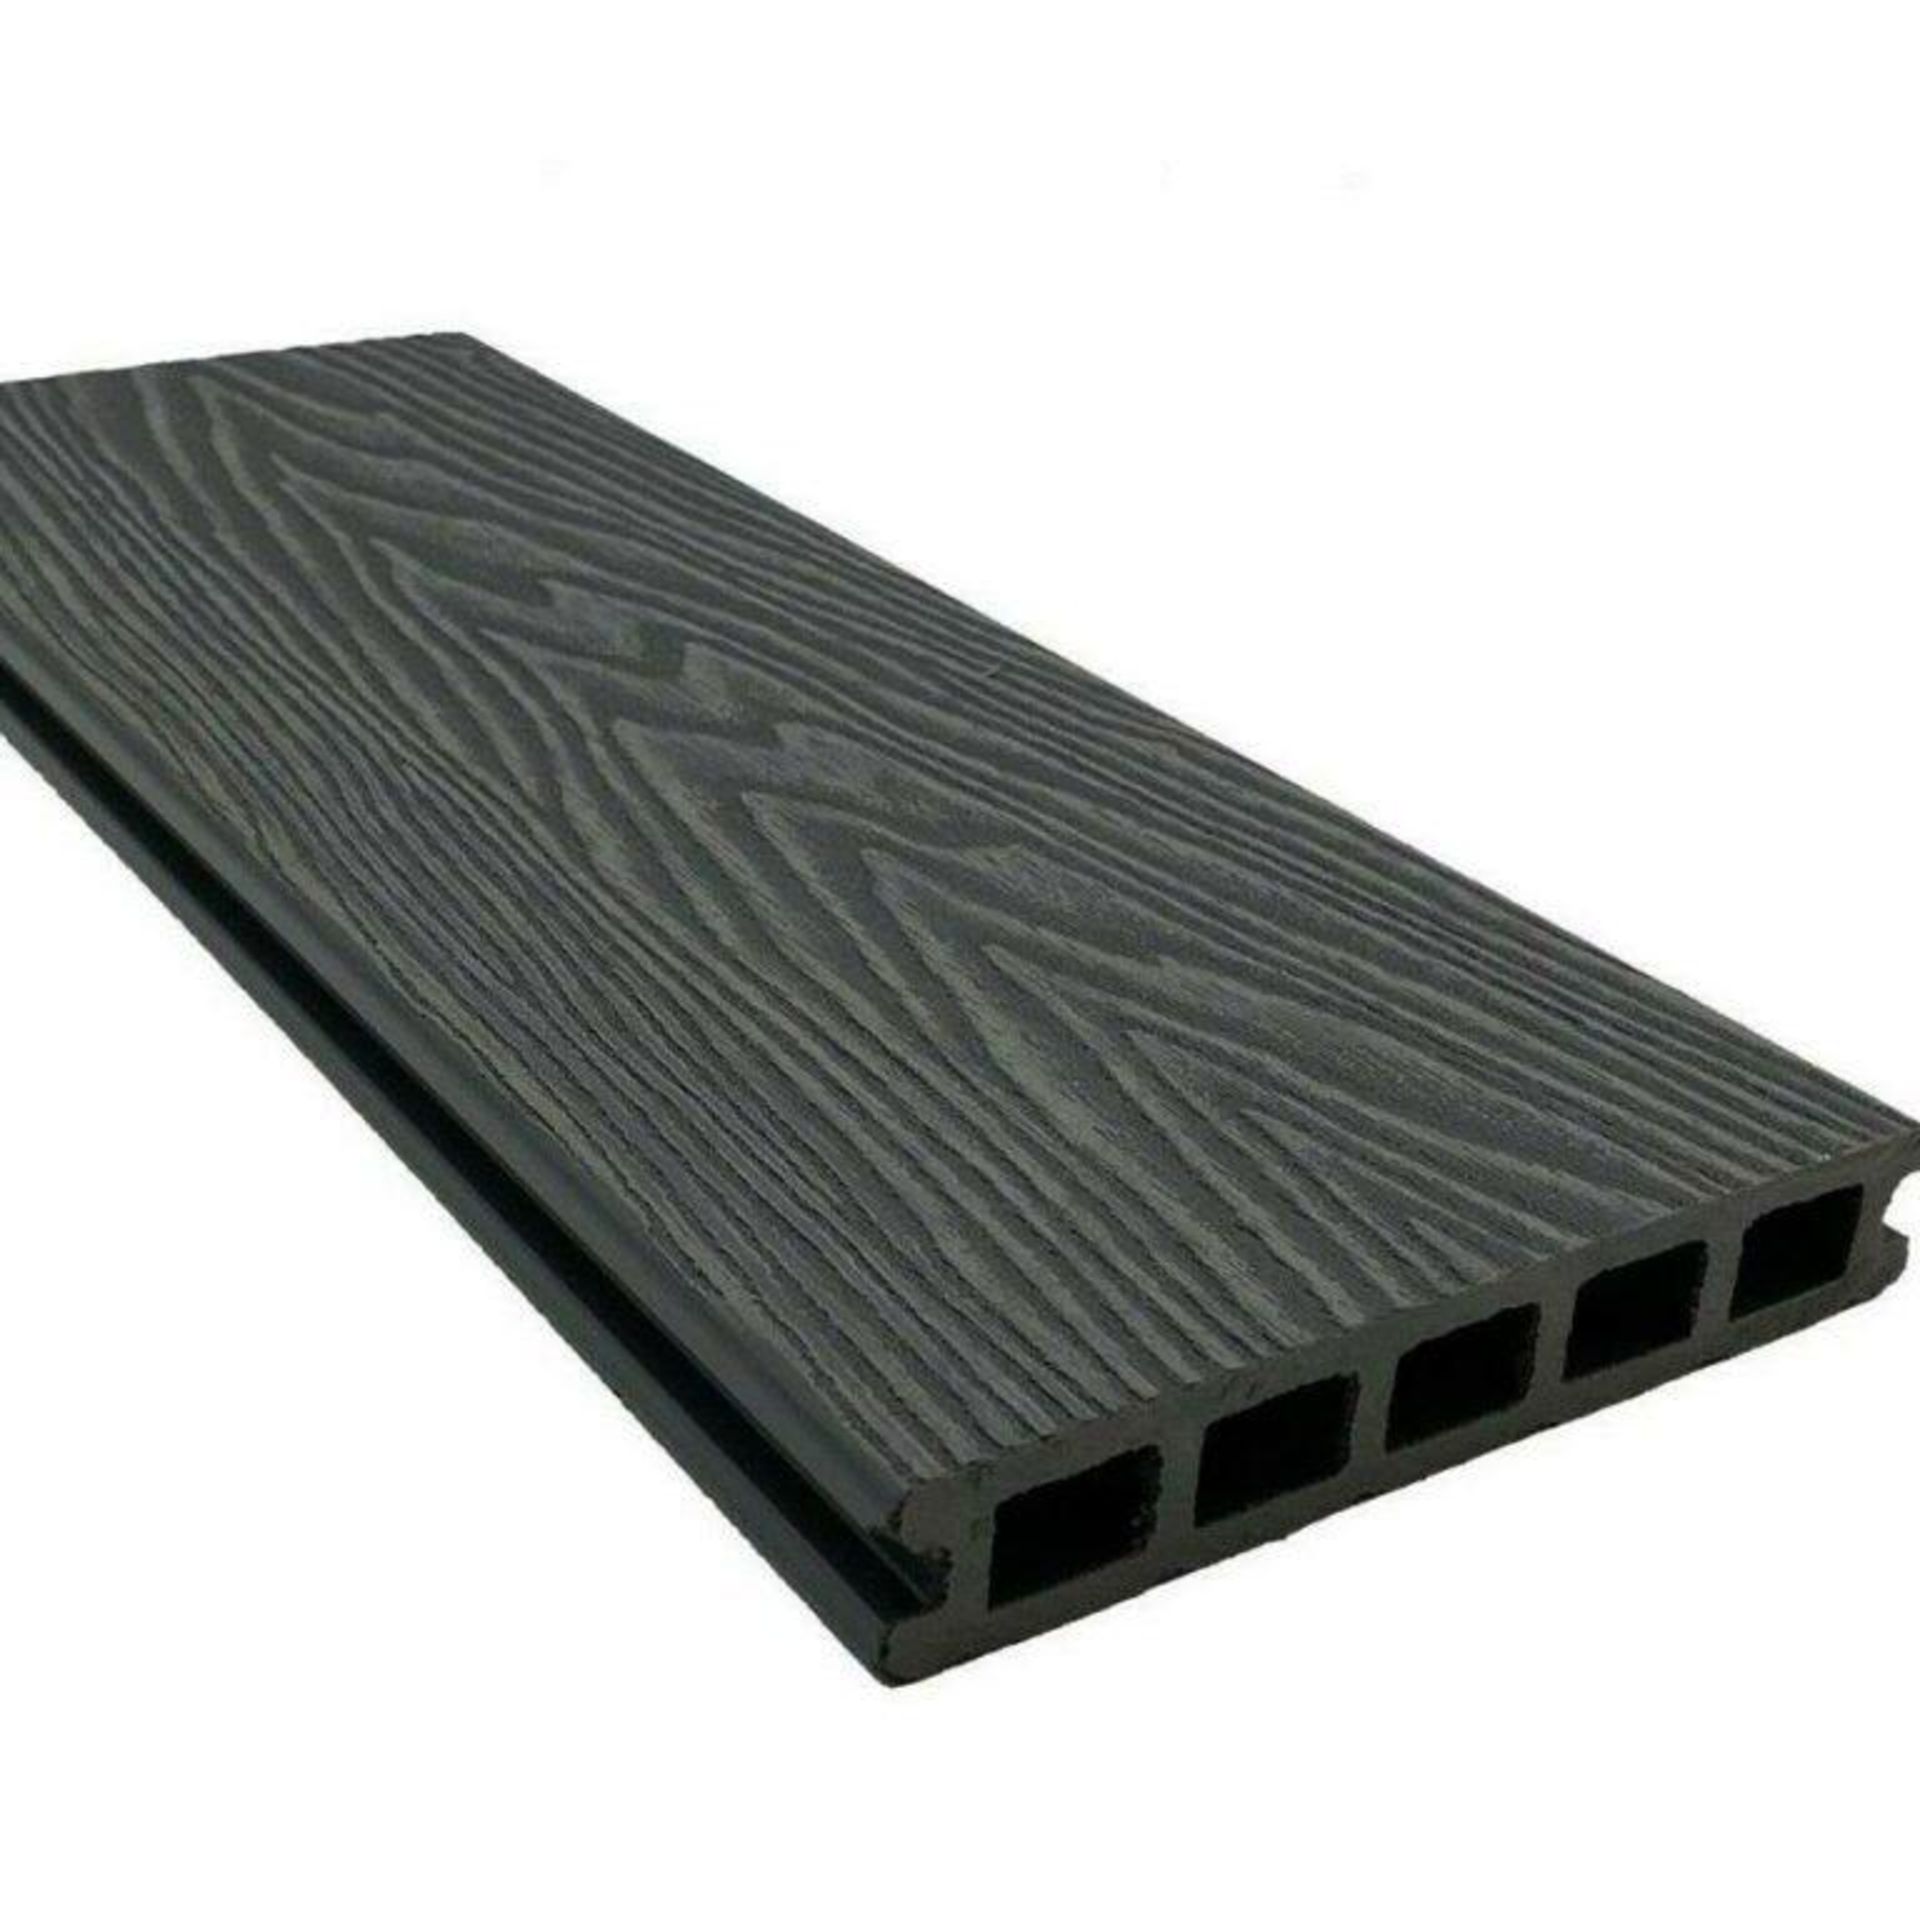 20 x Composite decking boards colour Ash Grey - Image 3 of 4